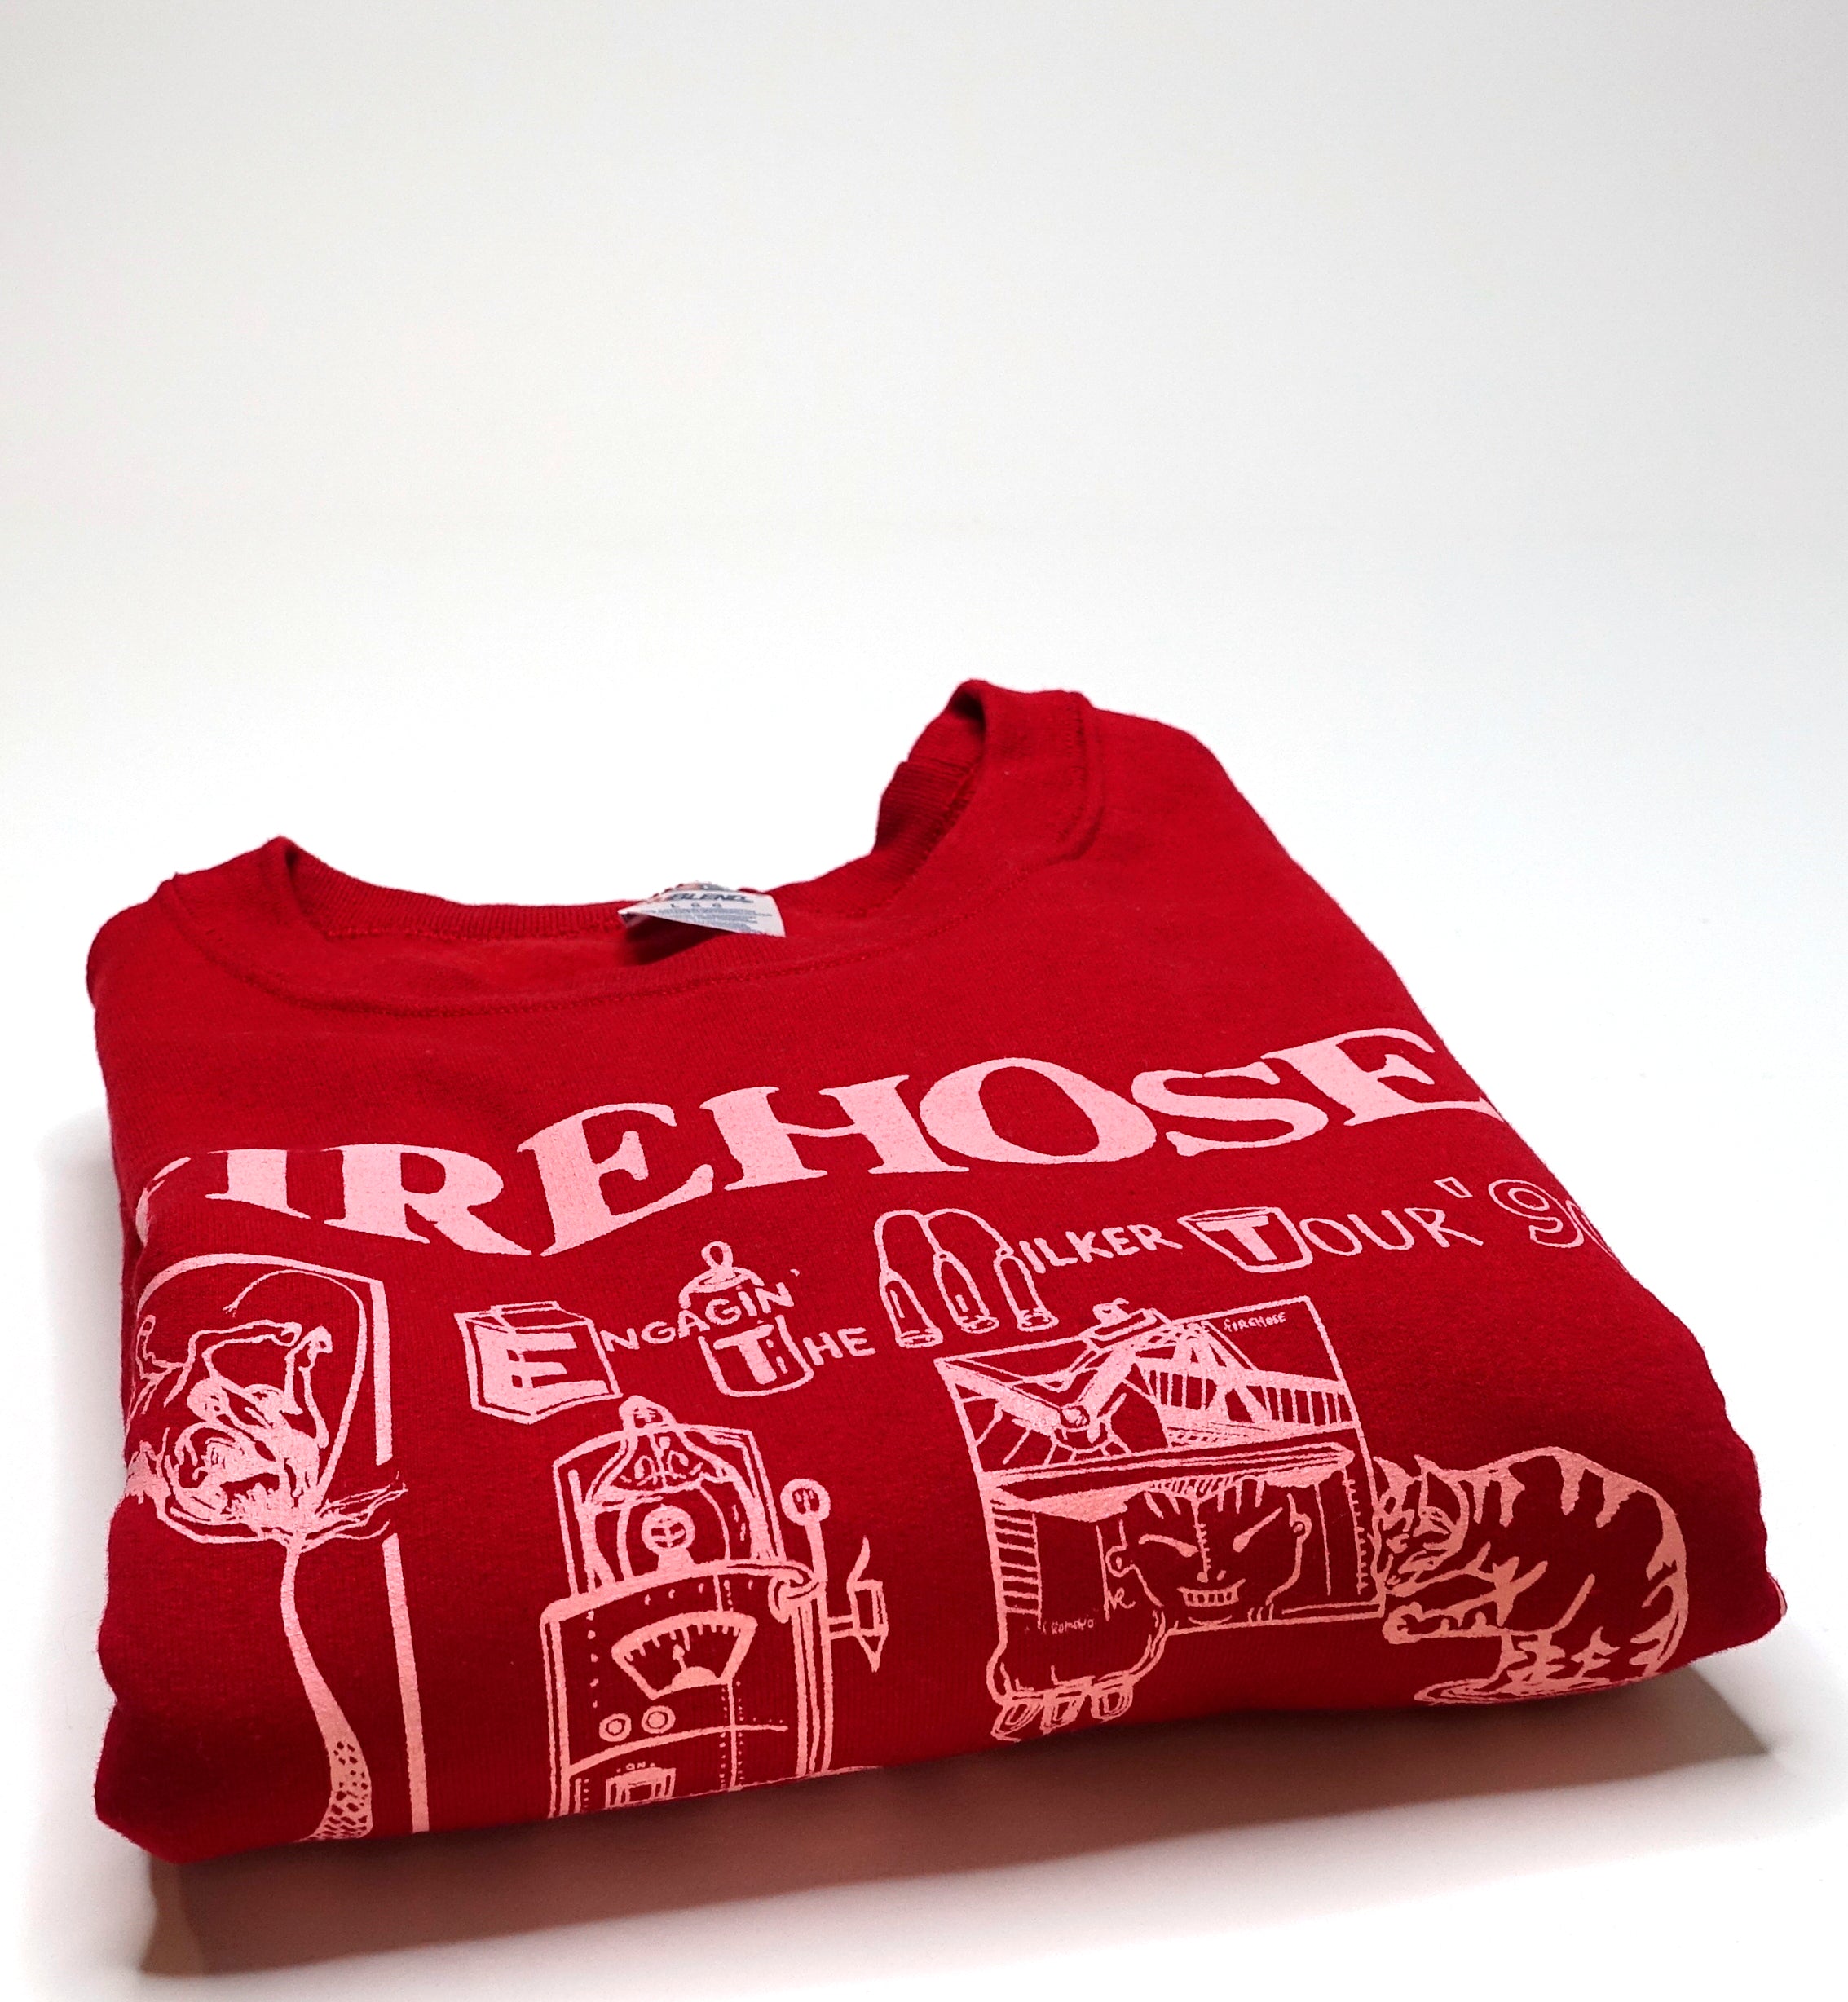 fIREHOSE - Engagin' the Milker 1990 Tour (Bootleg By Me) Sweat Shirt Size Large